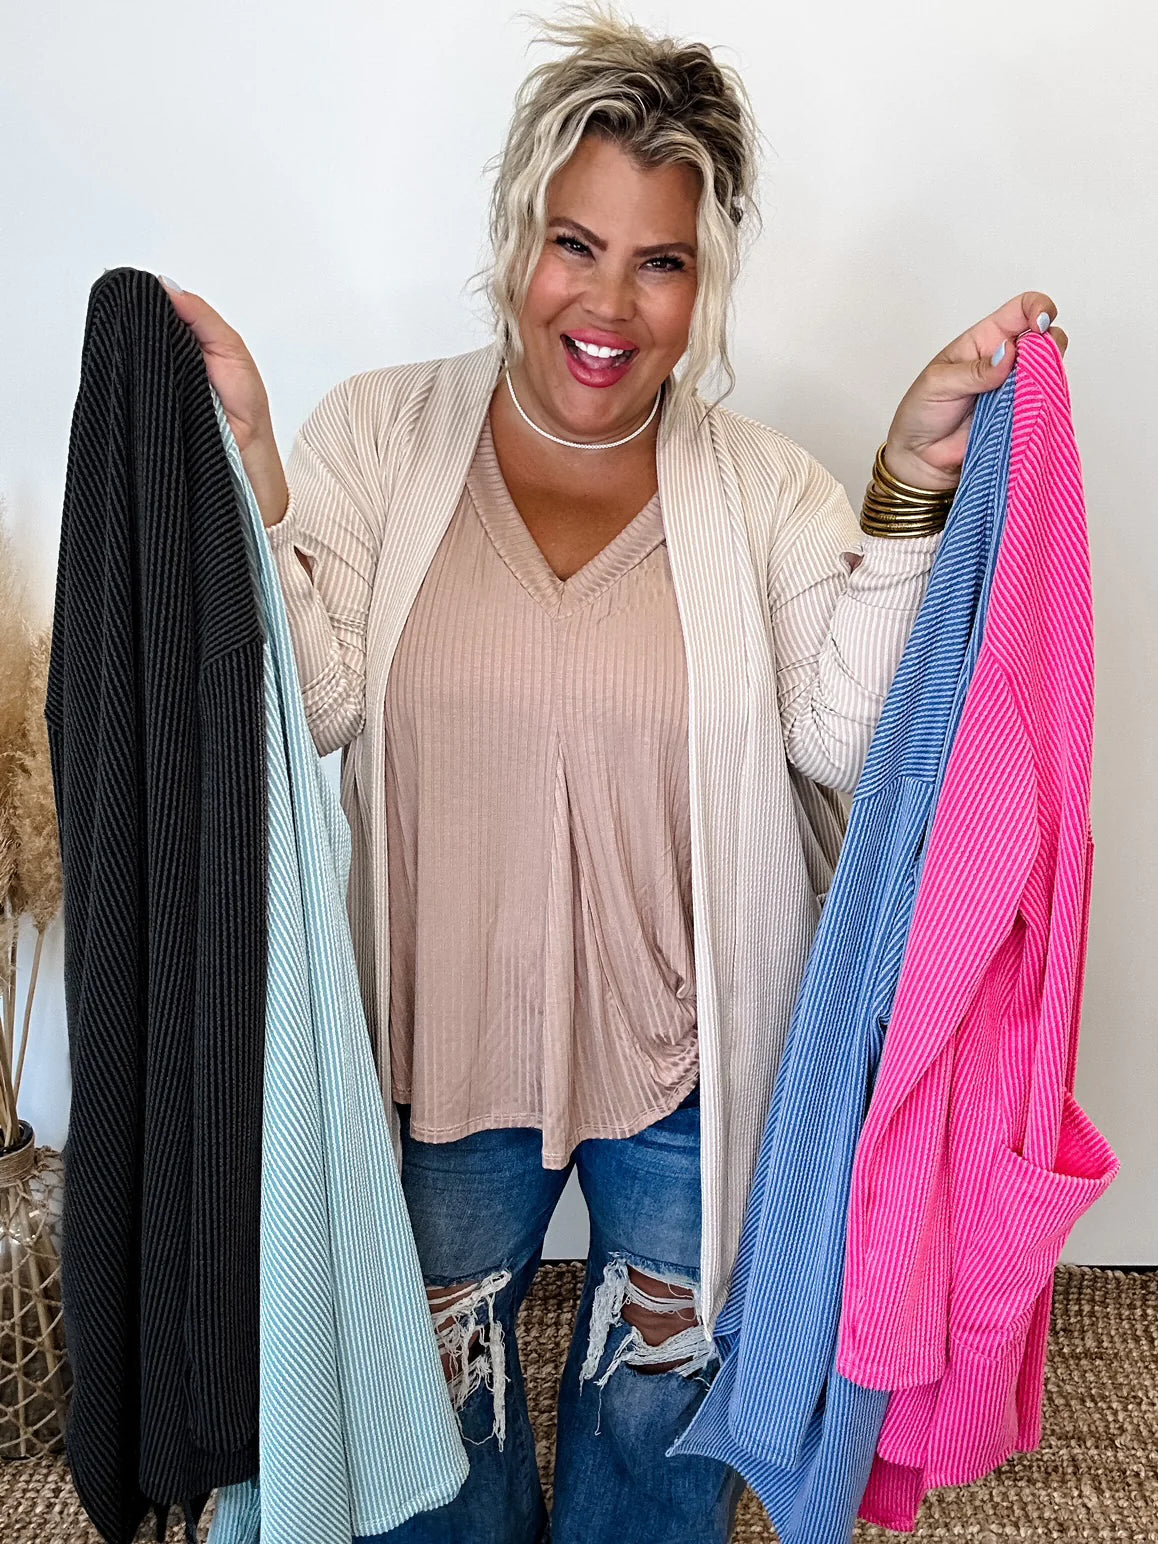 Blakeley holding up different color Cardigans. 